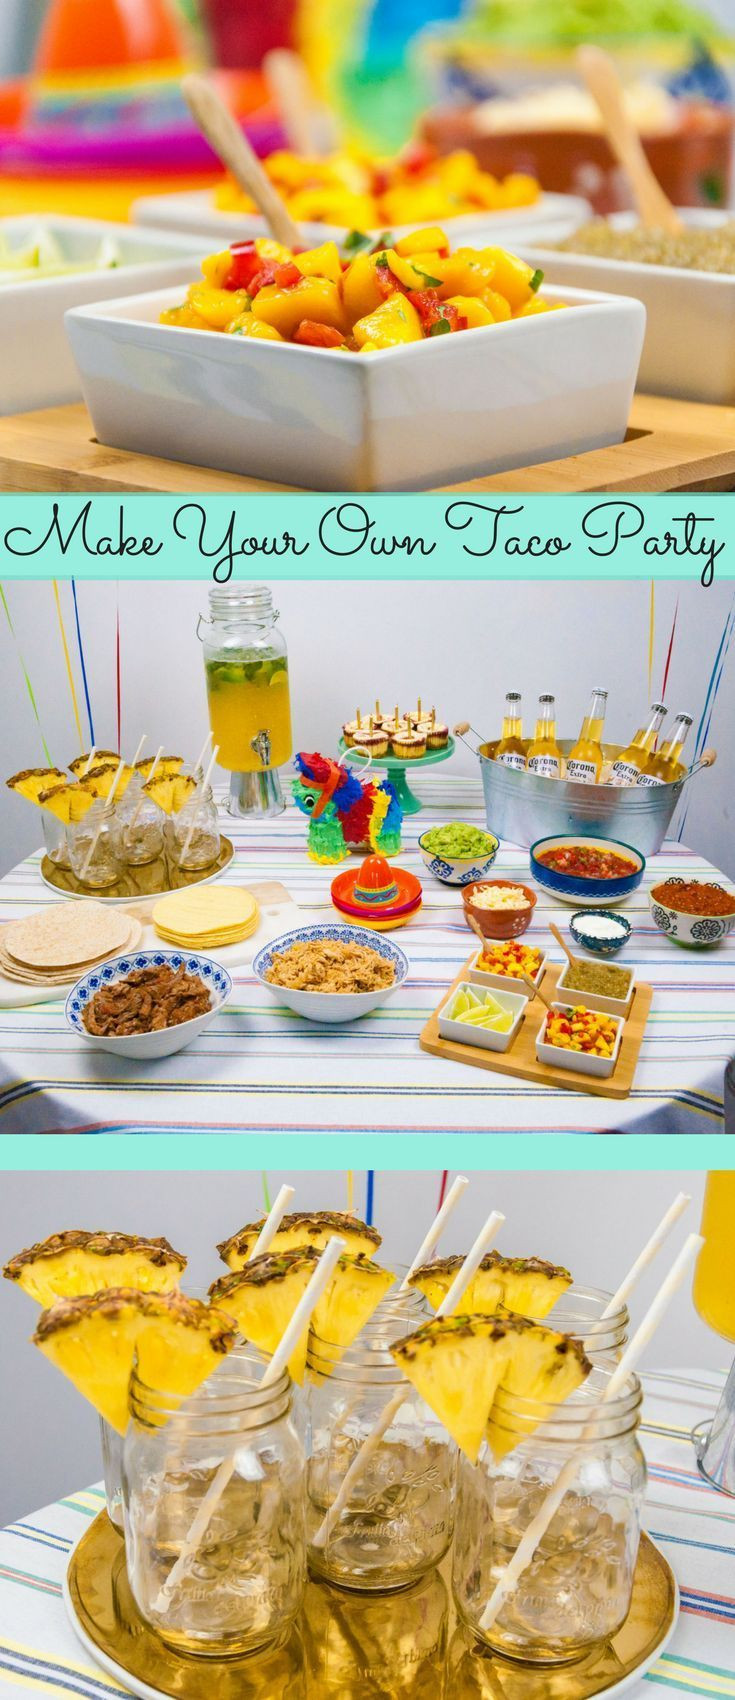 Taco Dinner Party Ideas
 Make Your Own Taco Party